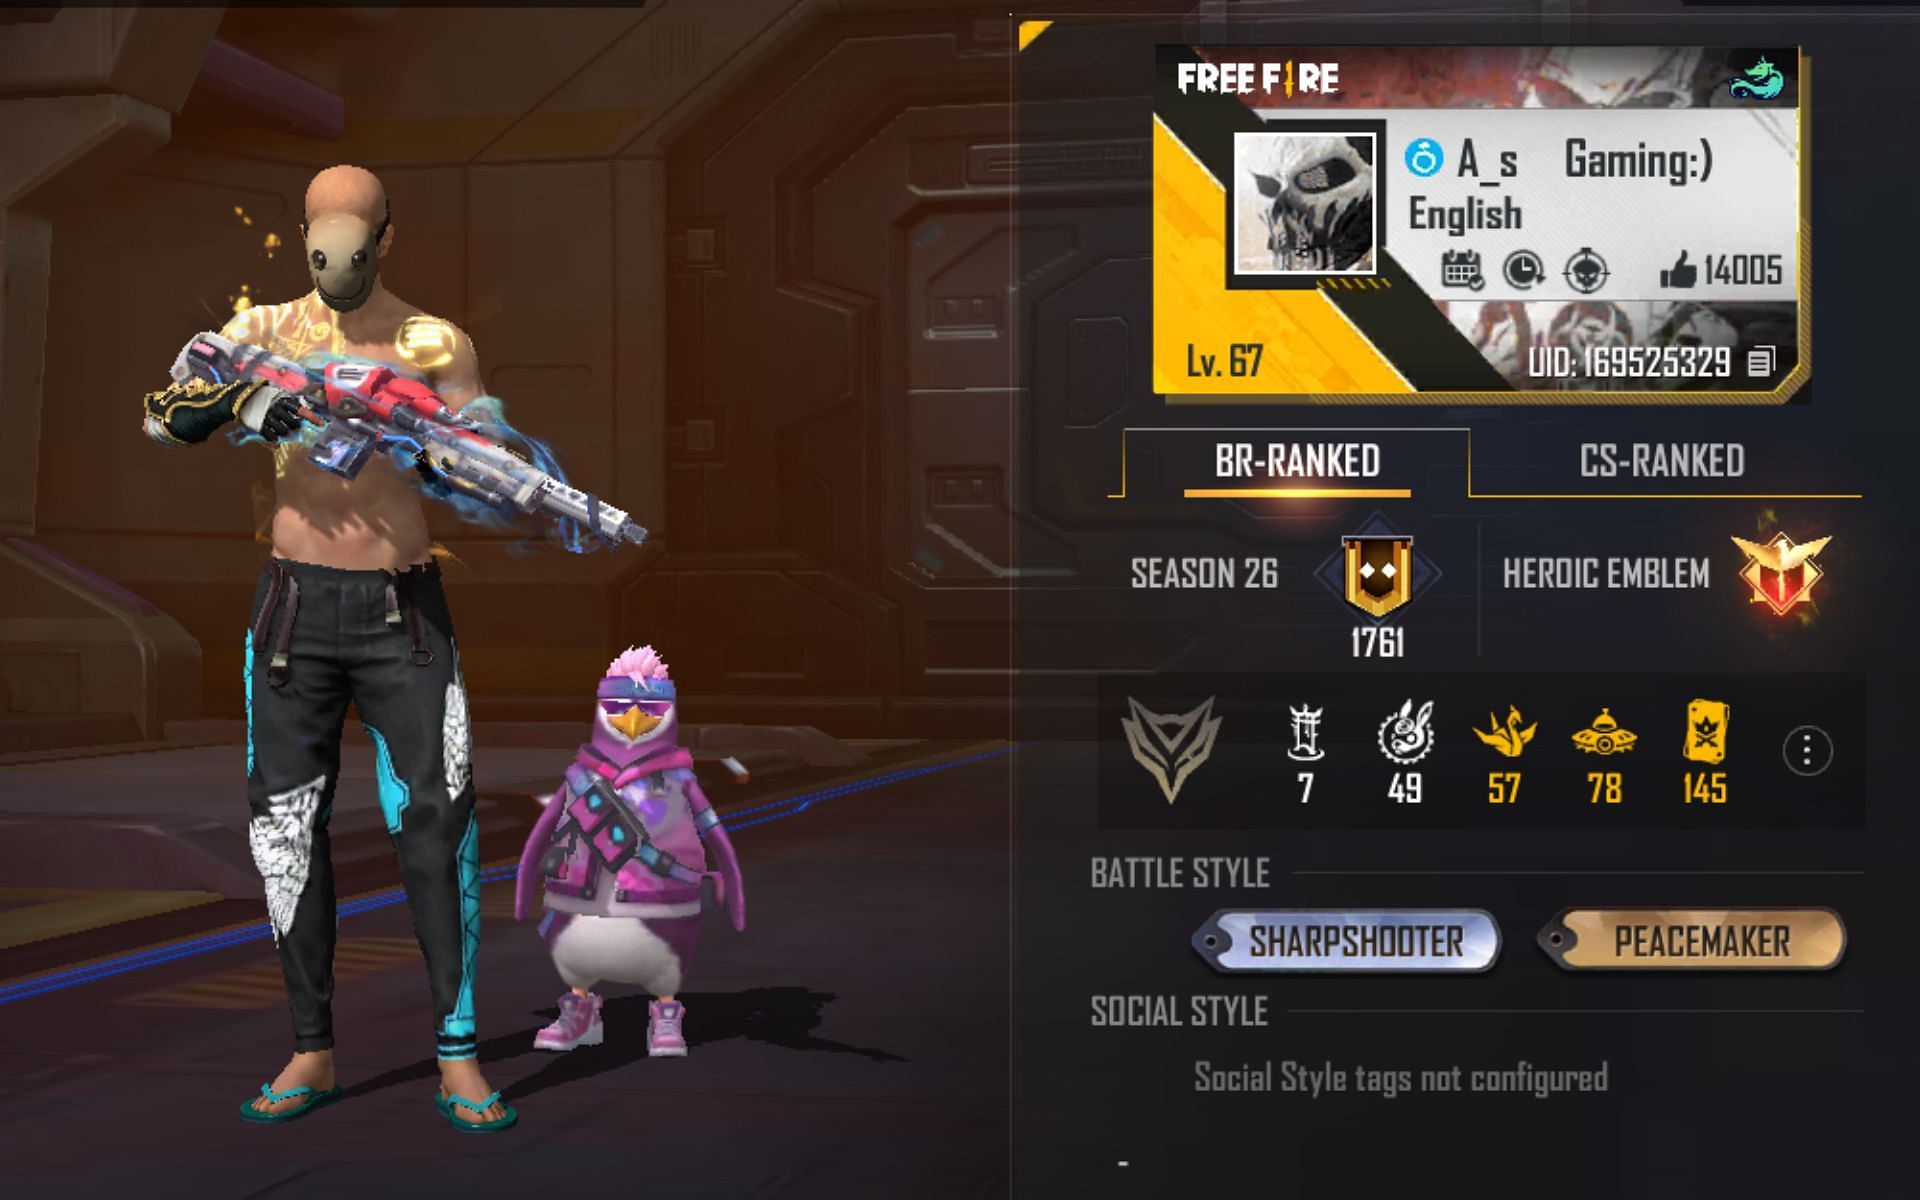 AS Gaming posts videos related to Garena Free Fire (Image via Garena)